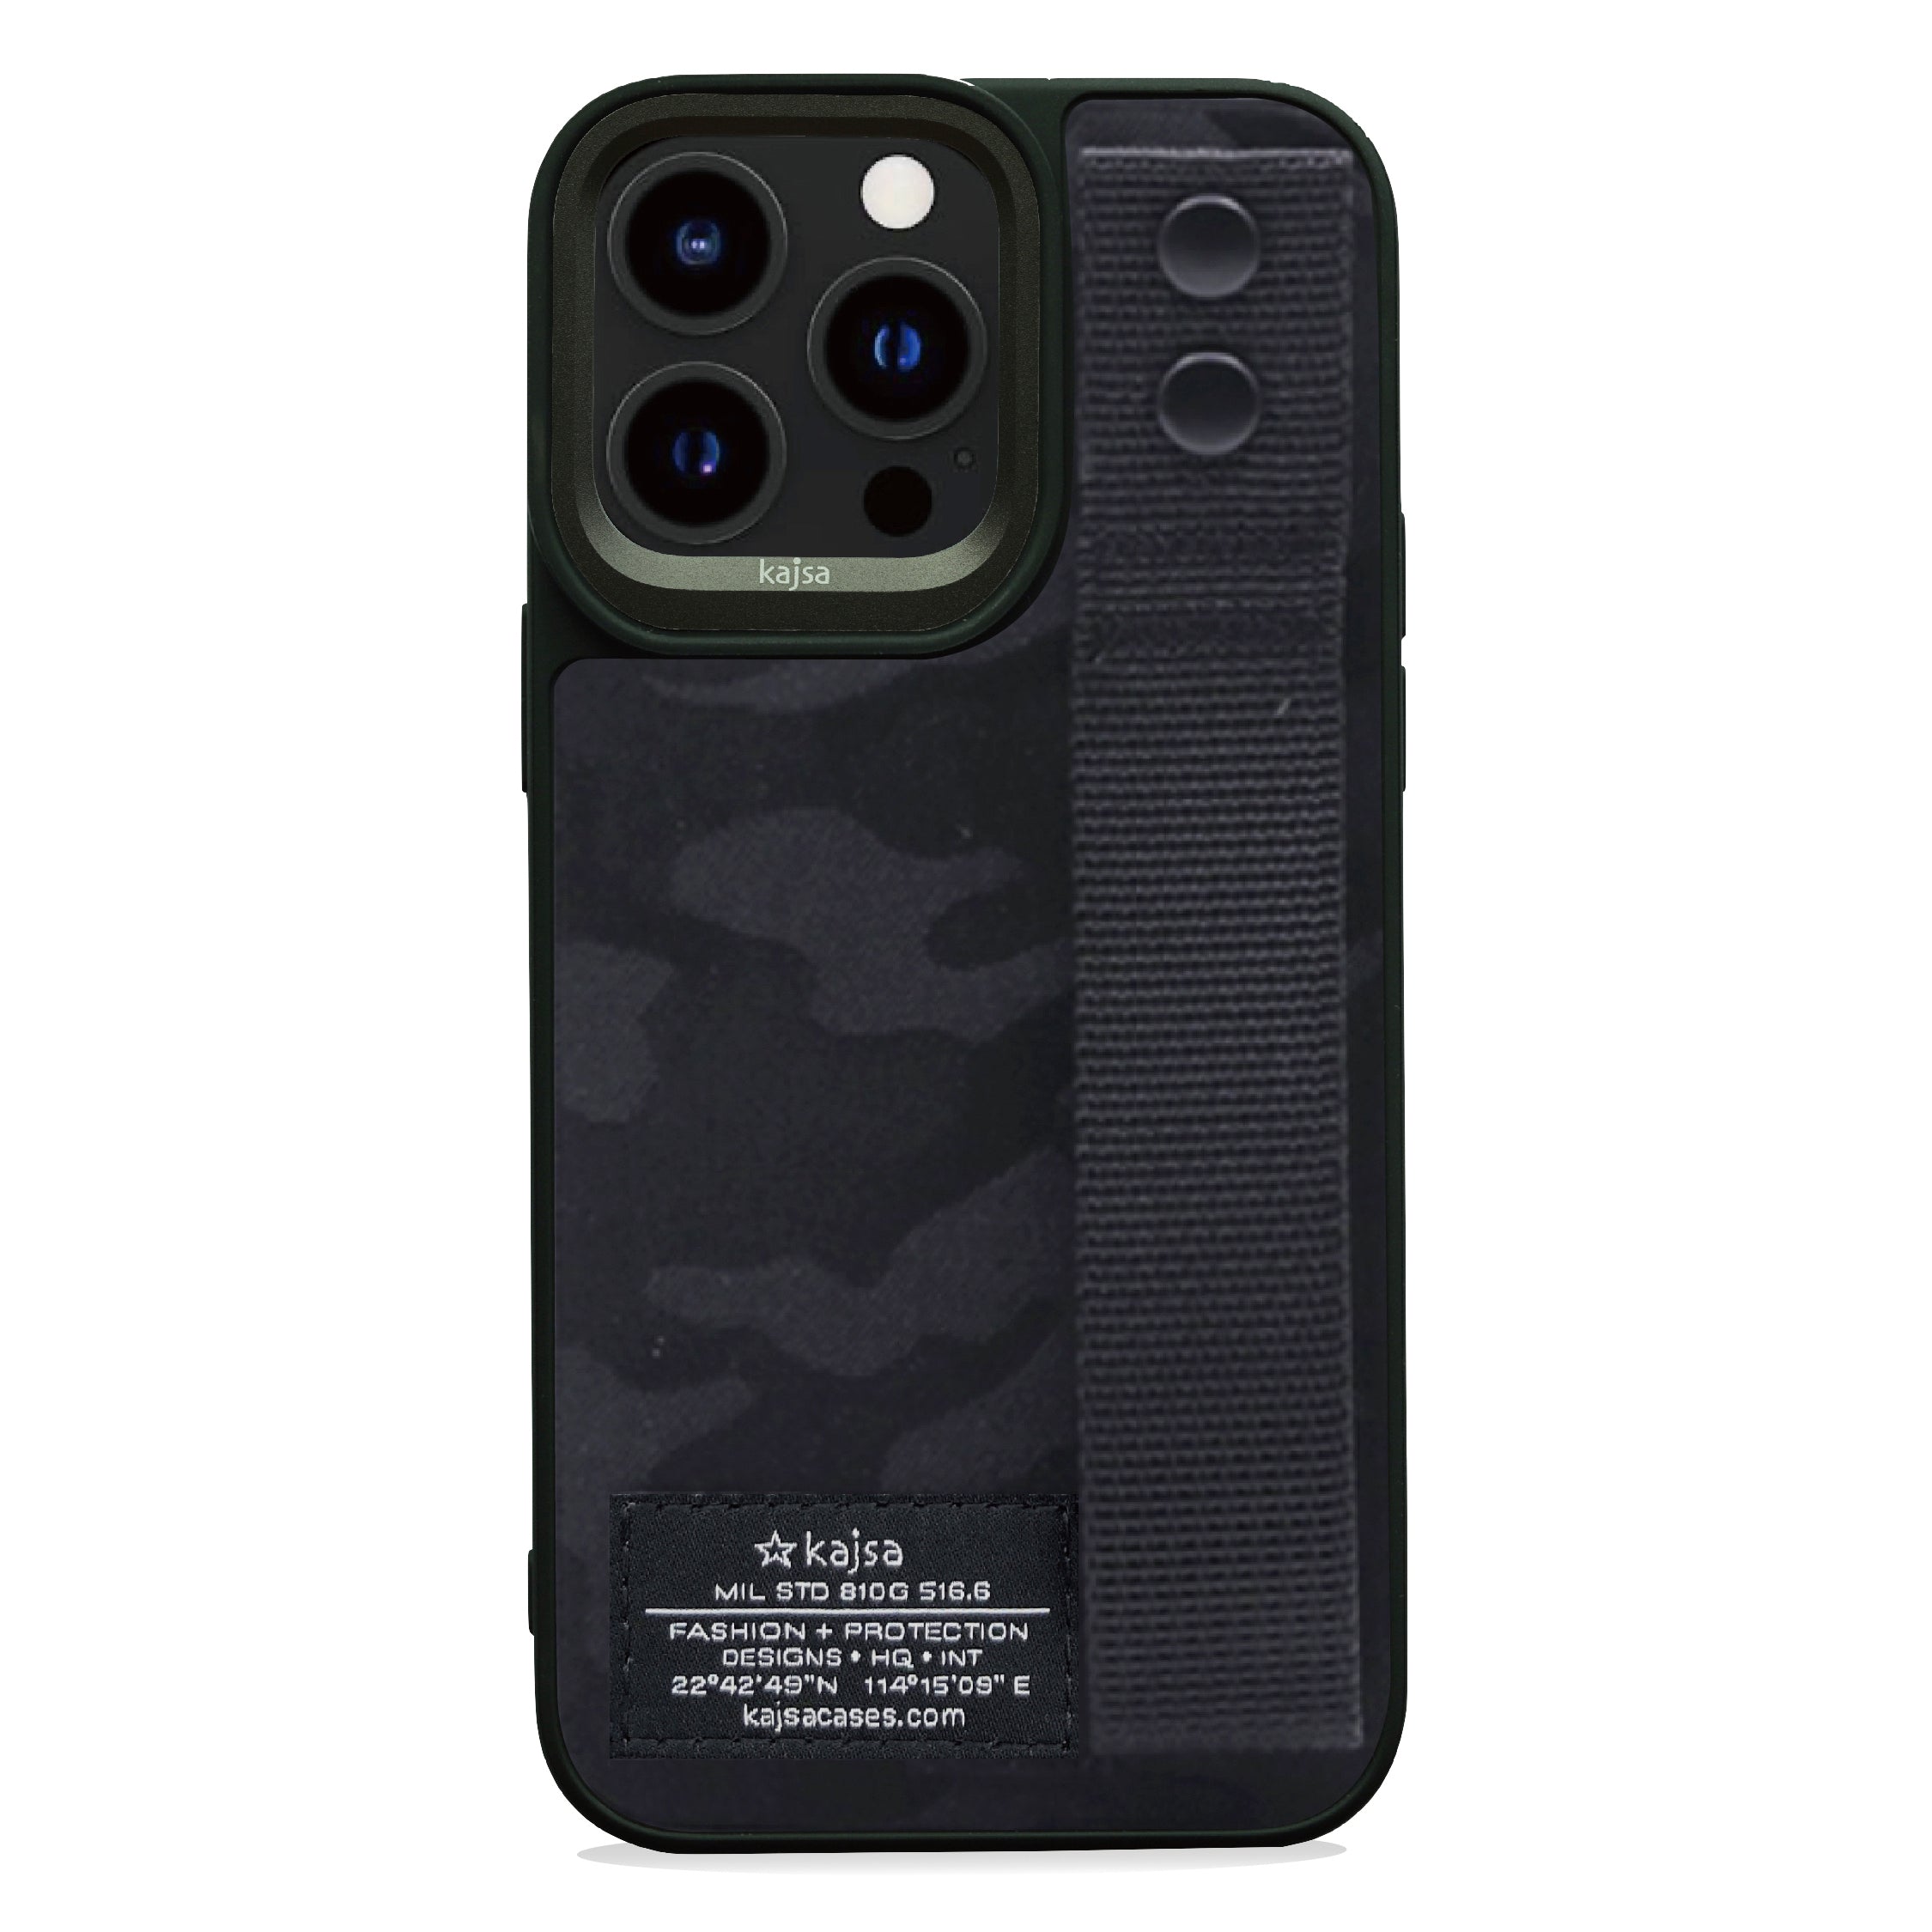 Outdoor Collection - Camo Satin Back Case for iPhone 14-Phone Case- phone case - phone cases- phone cover- iphone cover- iphone case- iphone cases- leather case- leather cases- DIYCASE - custom case - leather cover - hand strap case - croco pattern case - snake pattern case - carbon fiber phone case - phone case brand - unique phone case - high quality - phone case brand - protective case - buy phone case hong kong - online buy phone case - iphone‎手機殼 - 客製化手機殼 - samsung ‎手機殼 - 香港手機殼 - 買電話殼